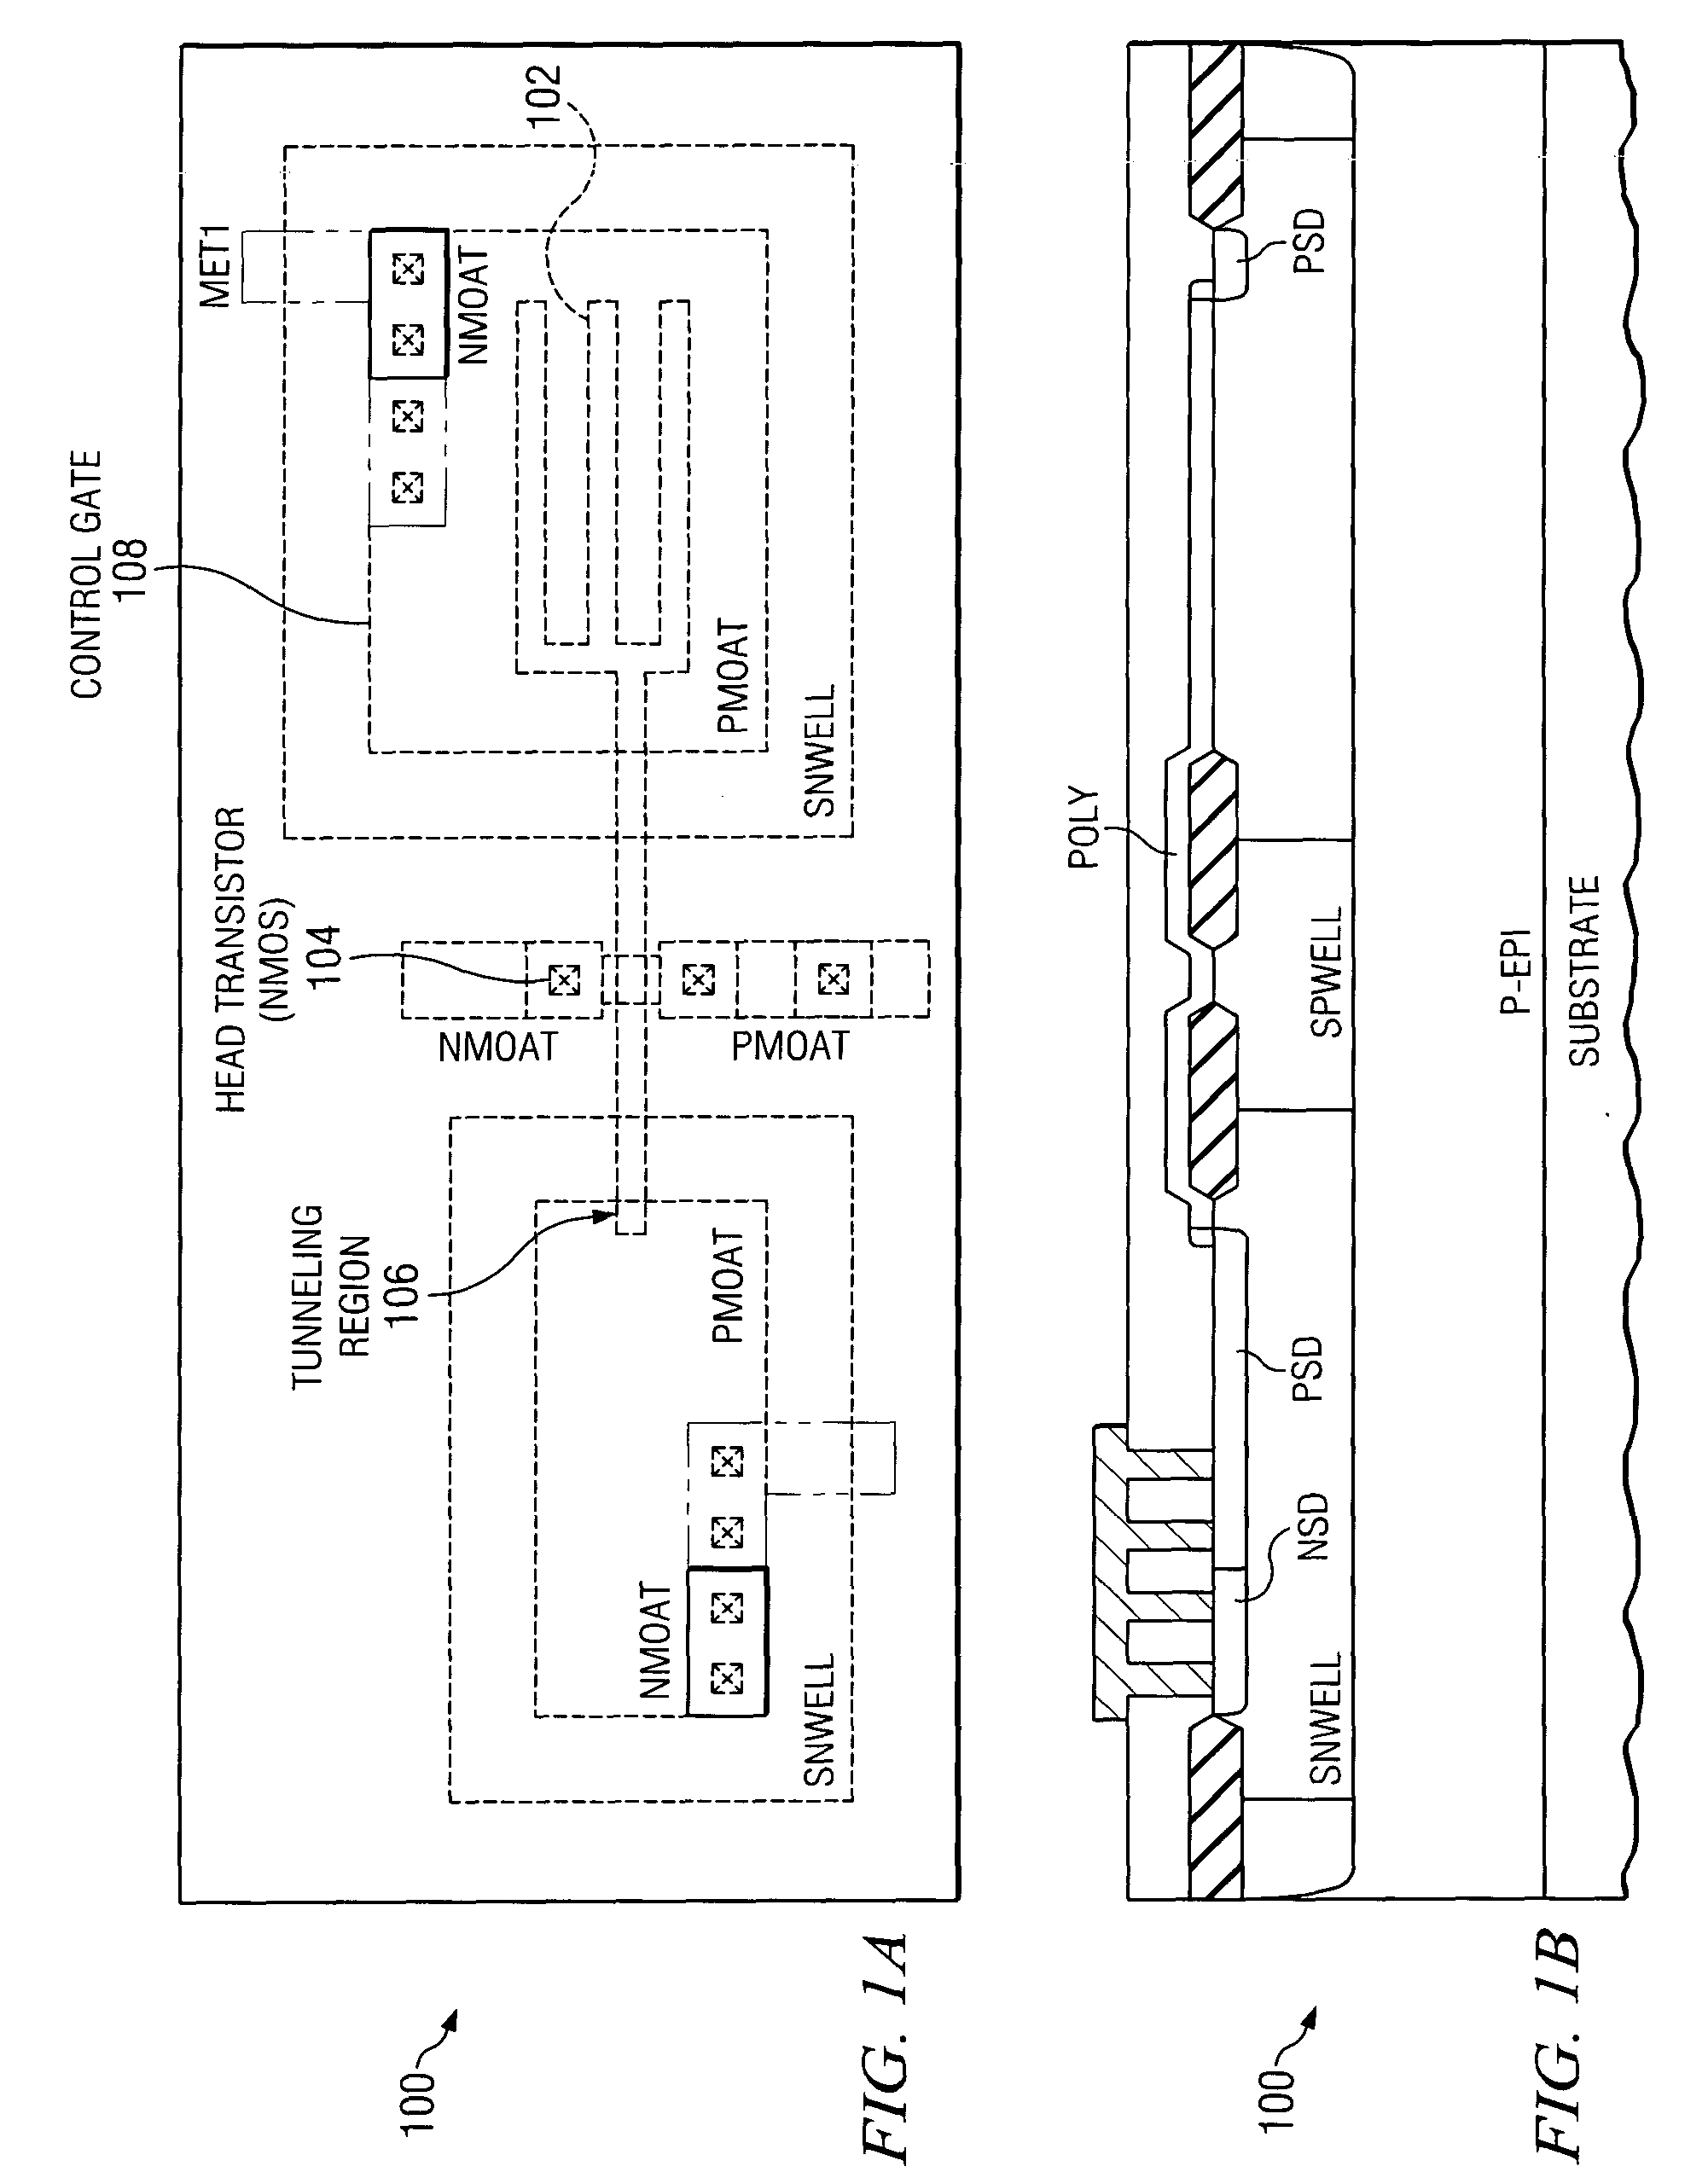 EEPROM device and method for providing lower programming voltage